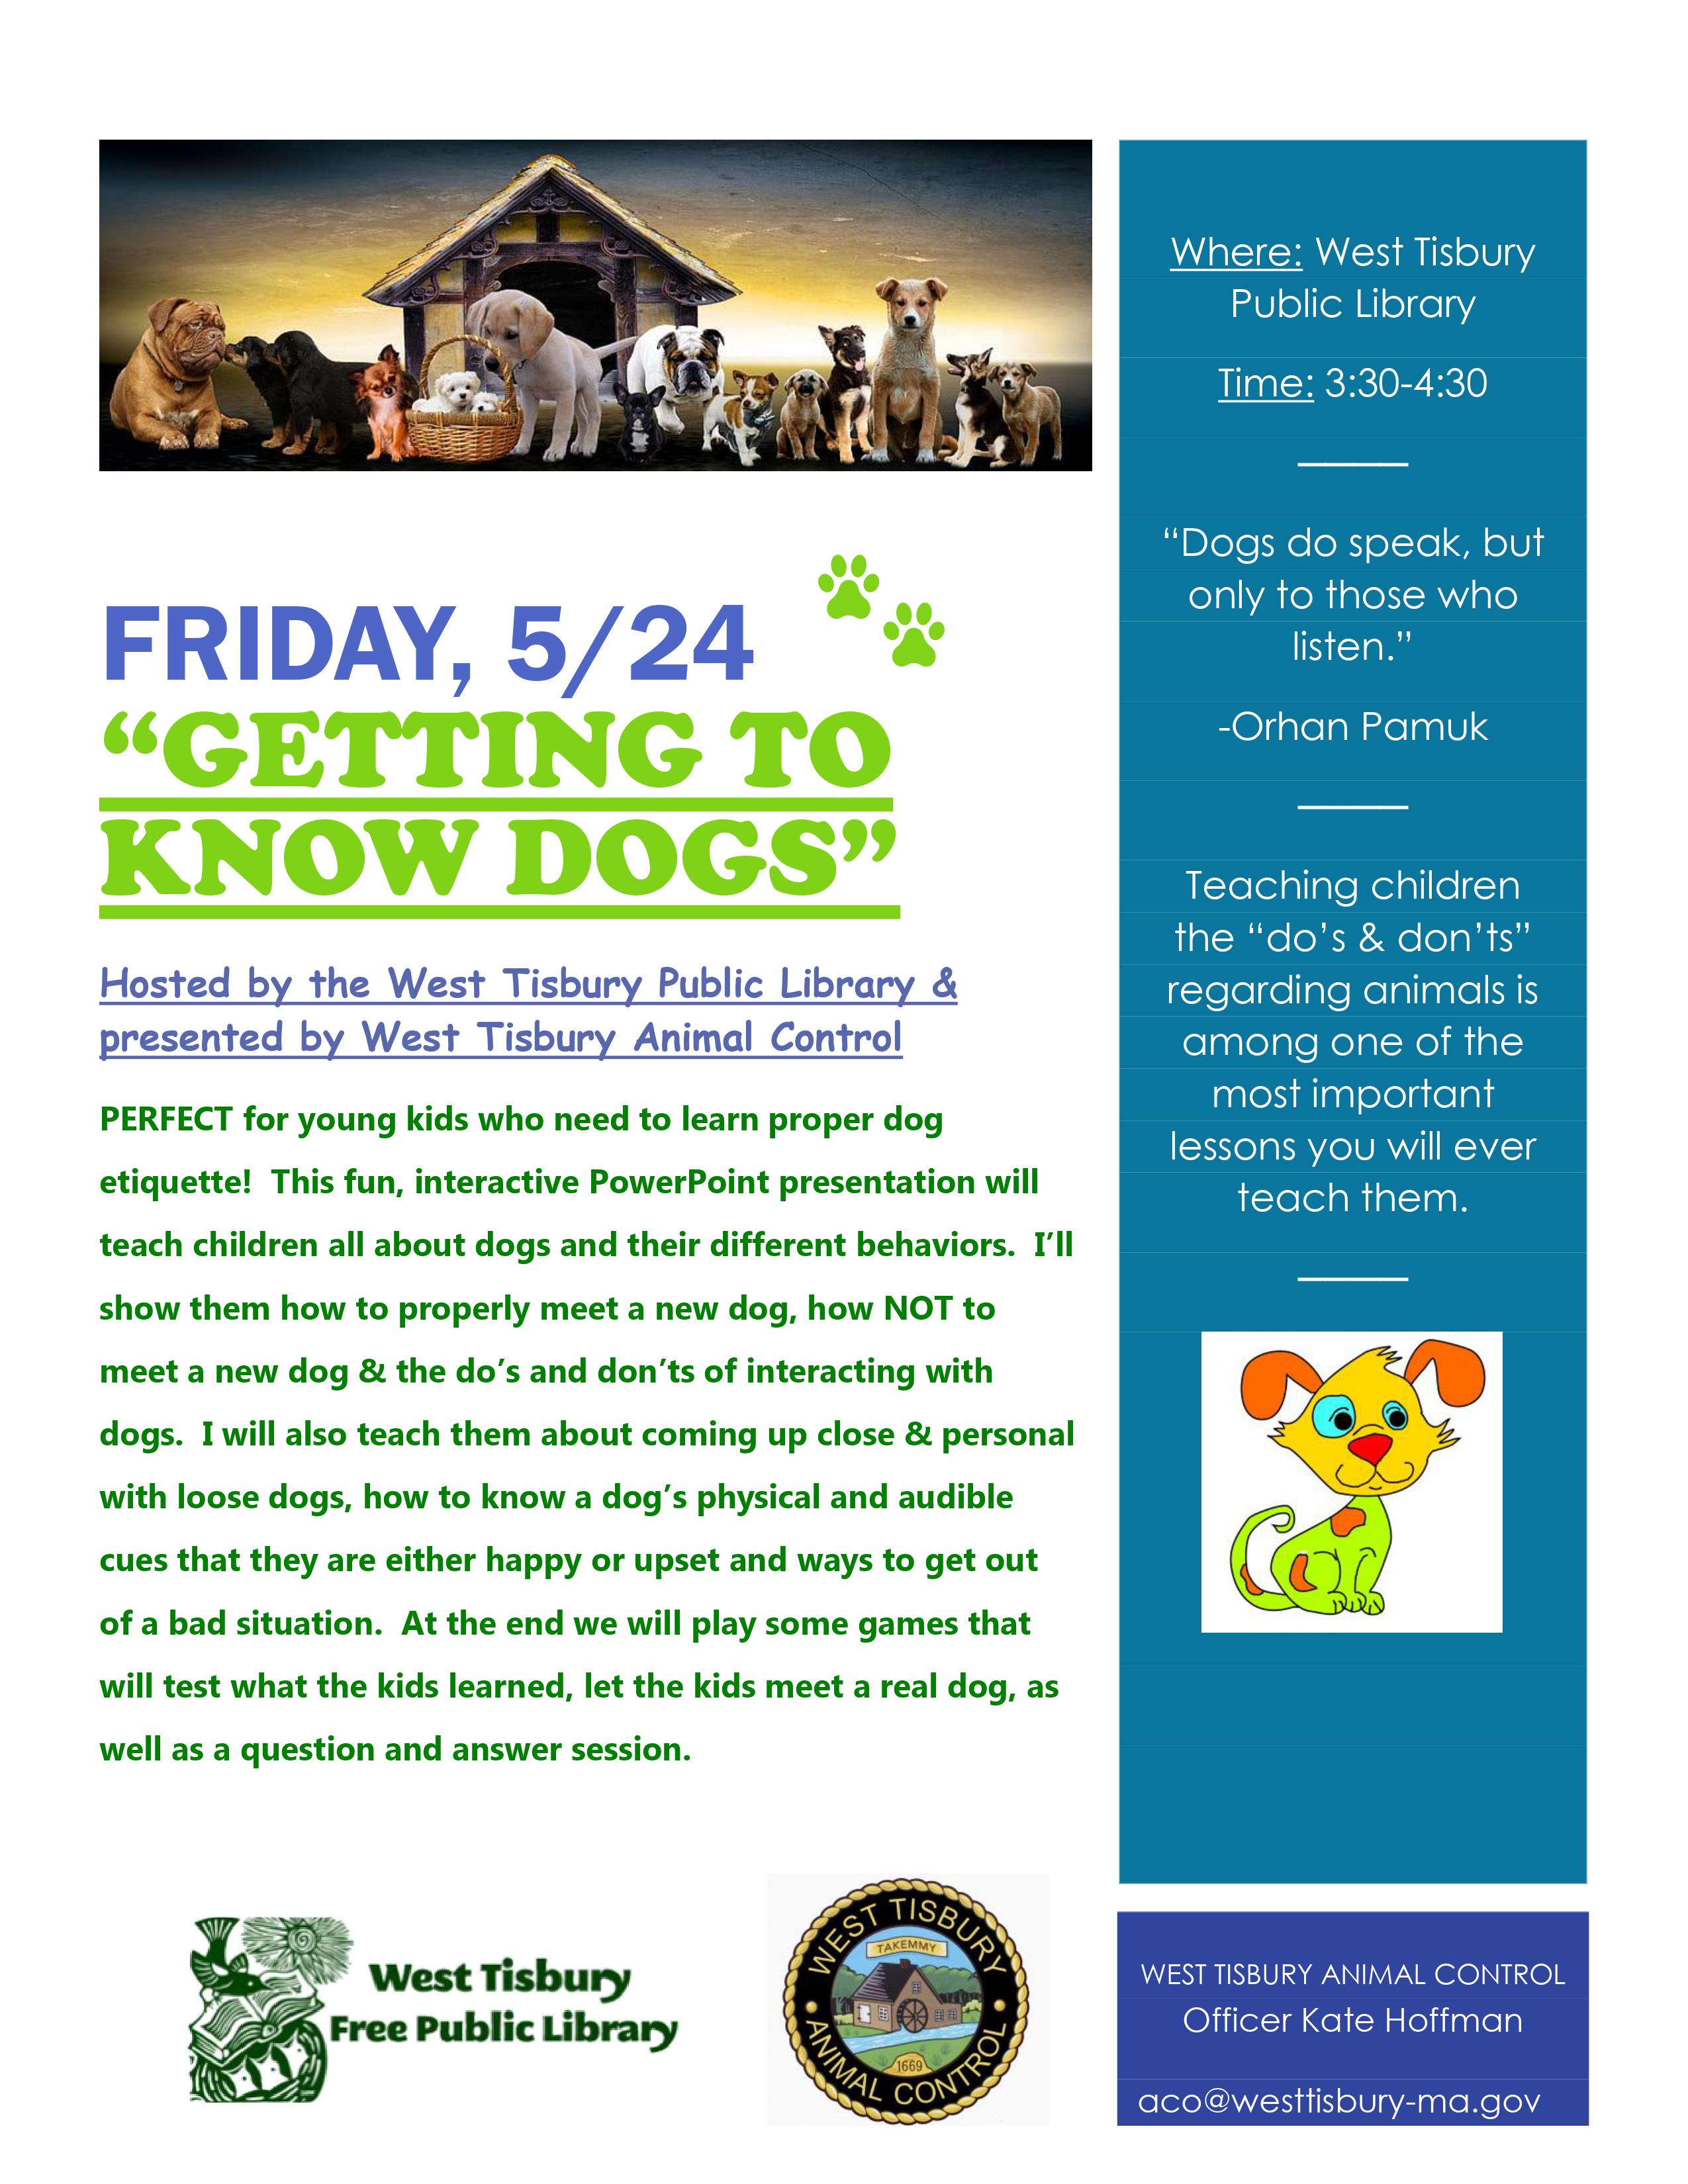 Getting to Know Dogs by West Tisbury Animal Control